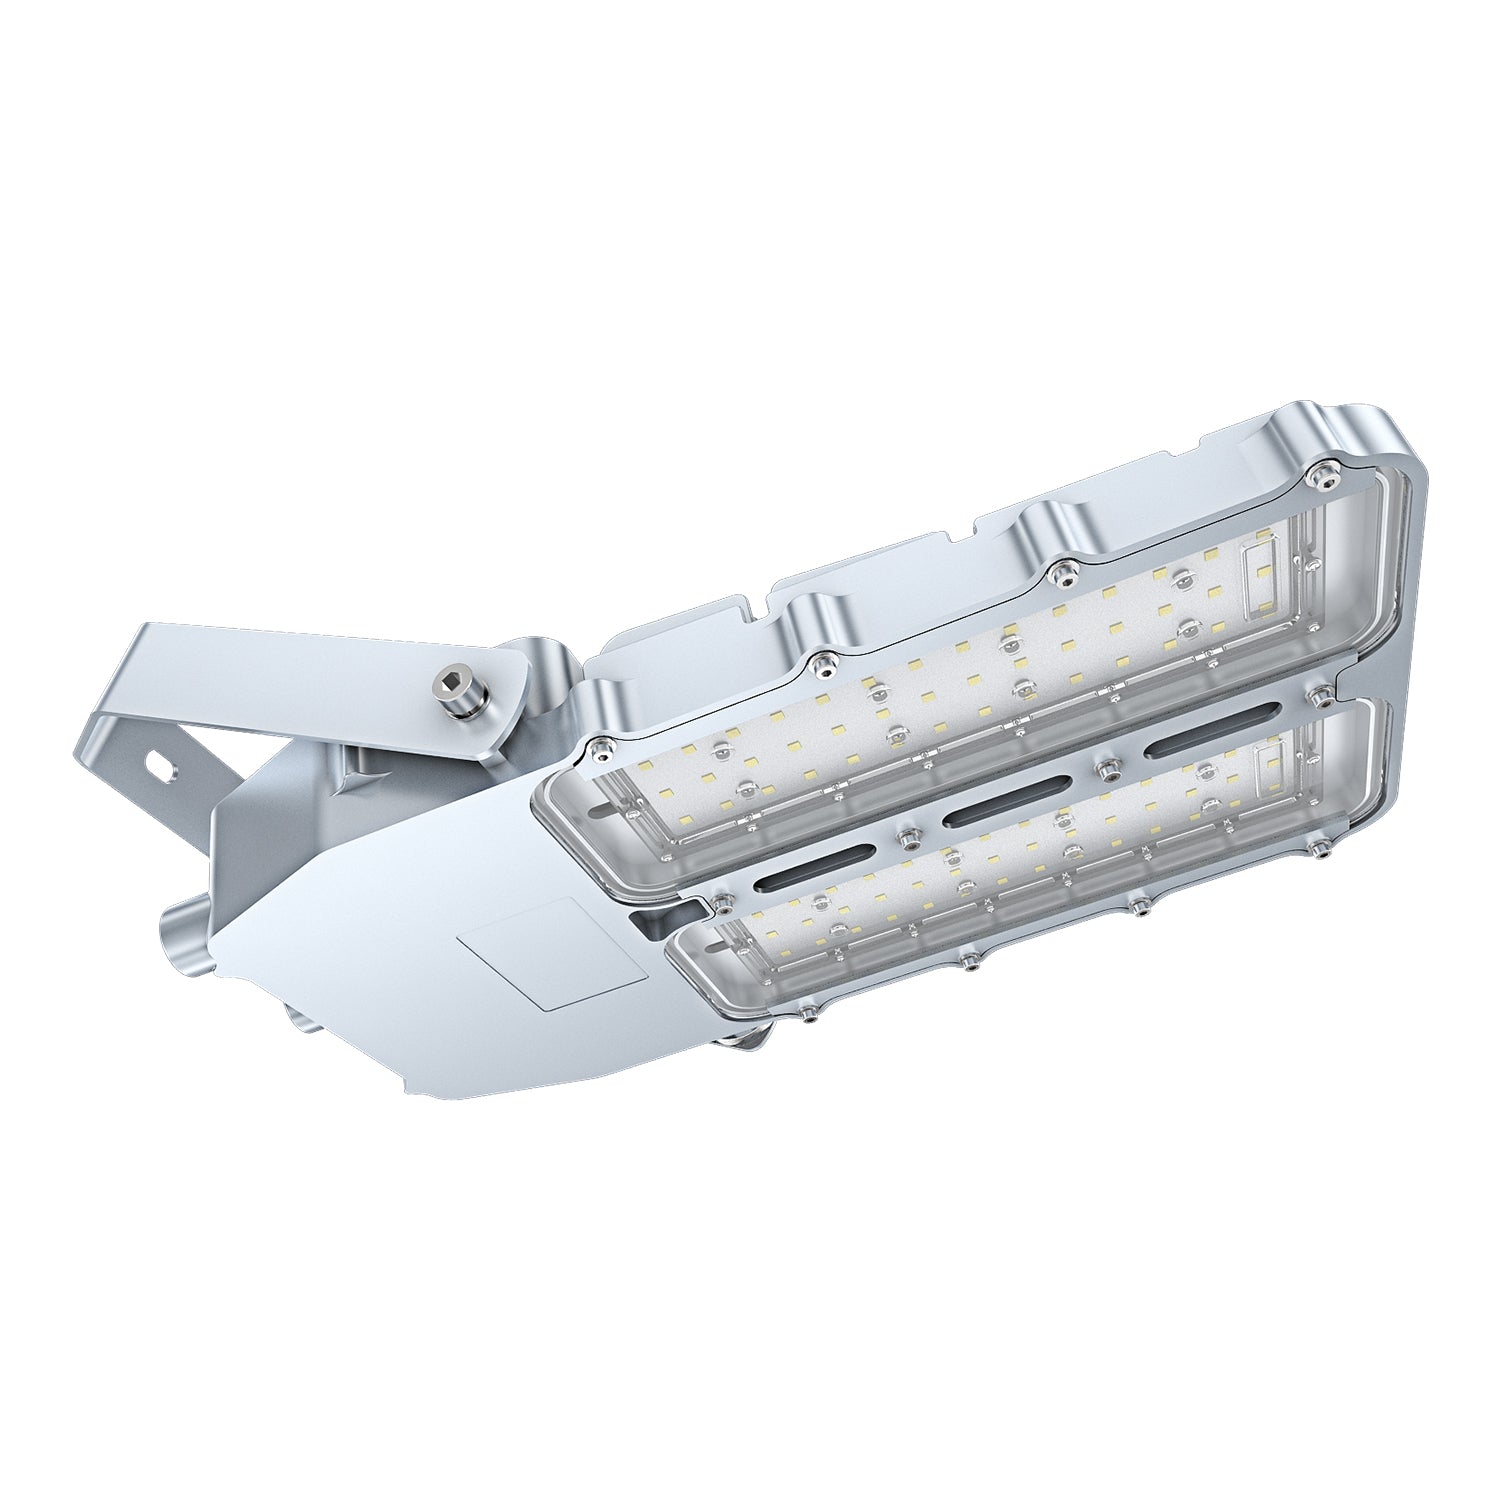 STA124 Series 200W LED Explosion Proof Area Light - 5000K Daylight, 26000LM, Dimmable, IP66 Rated, Hazardous Location Lighting Fixtures